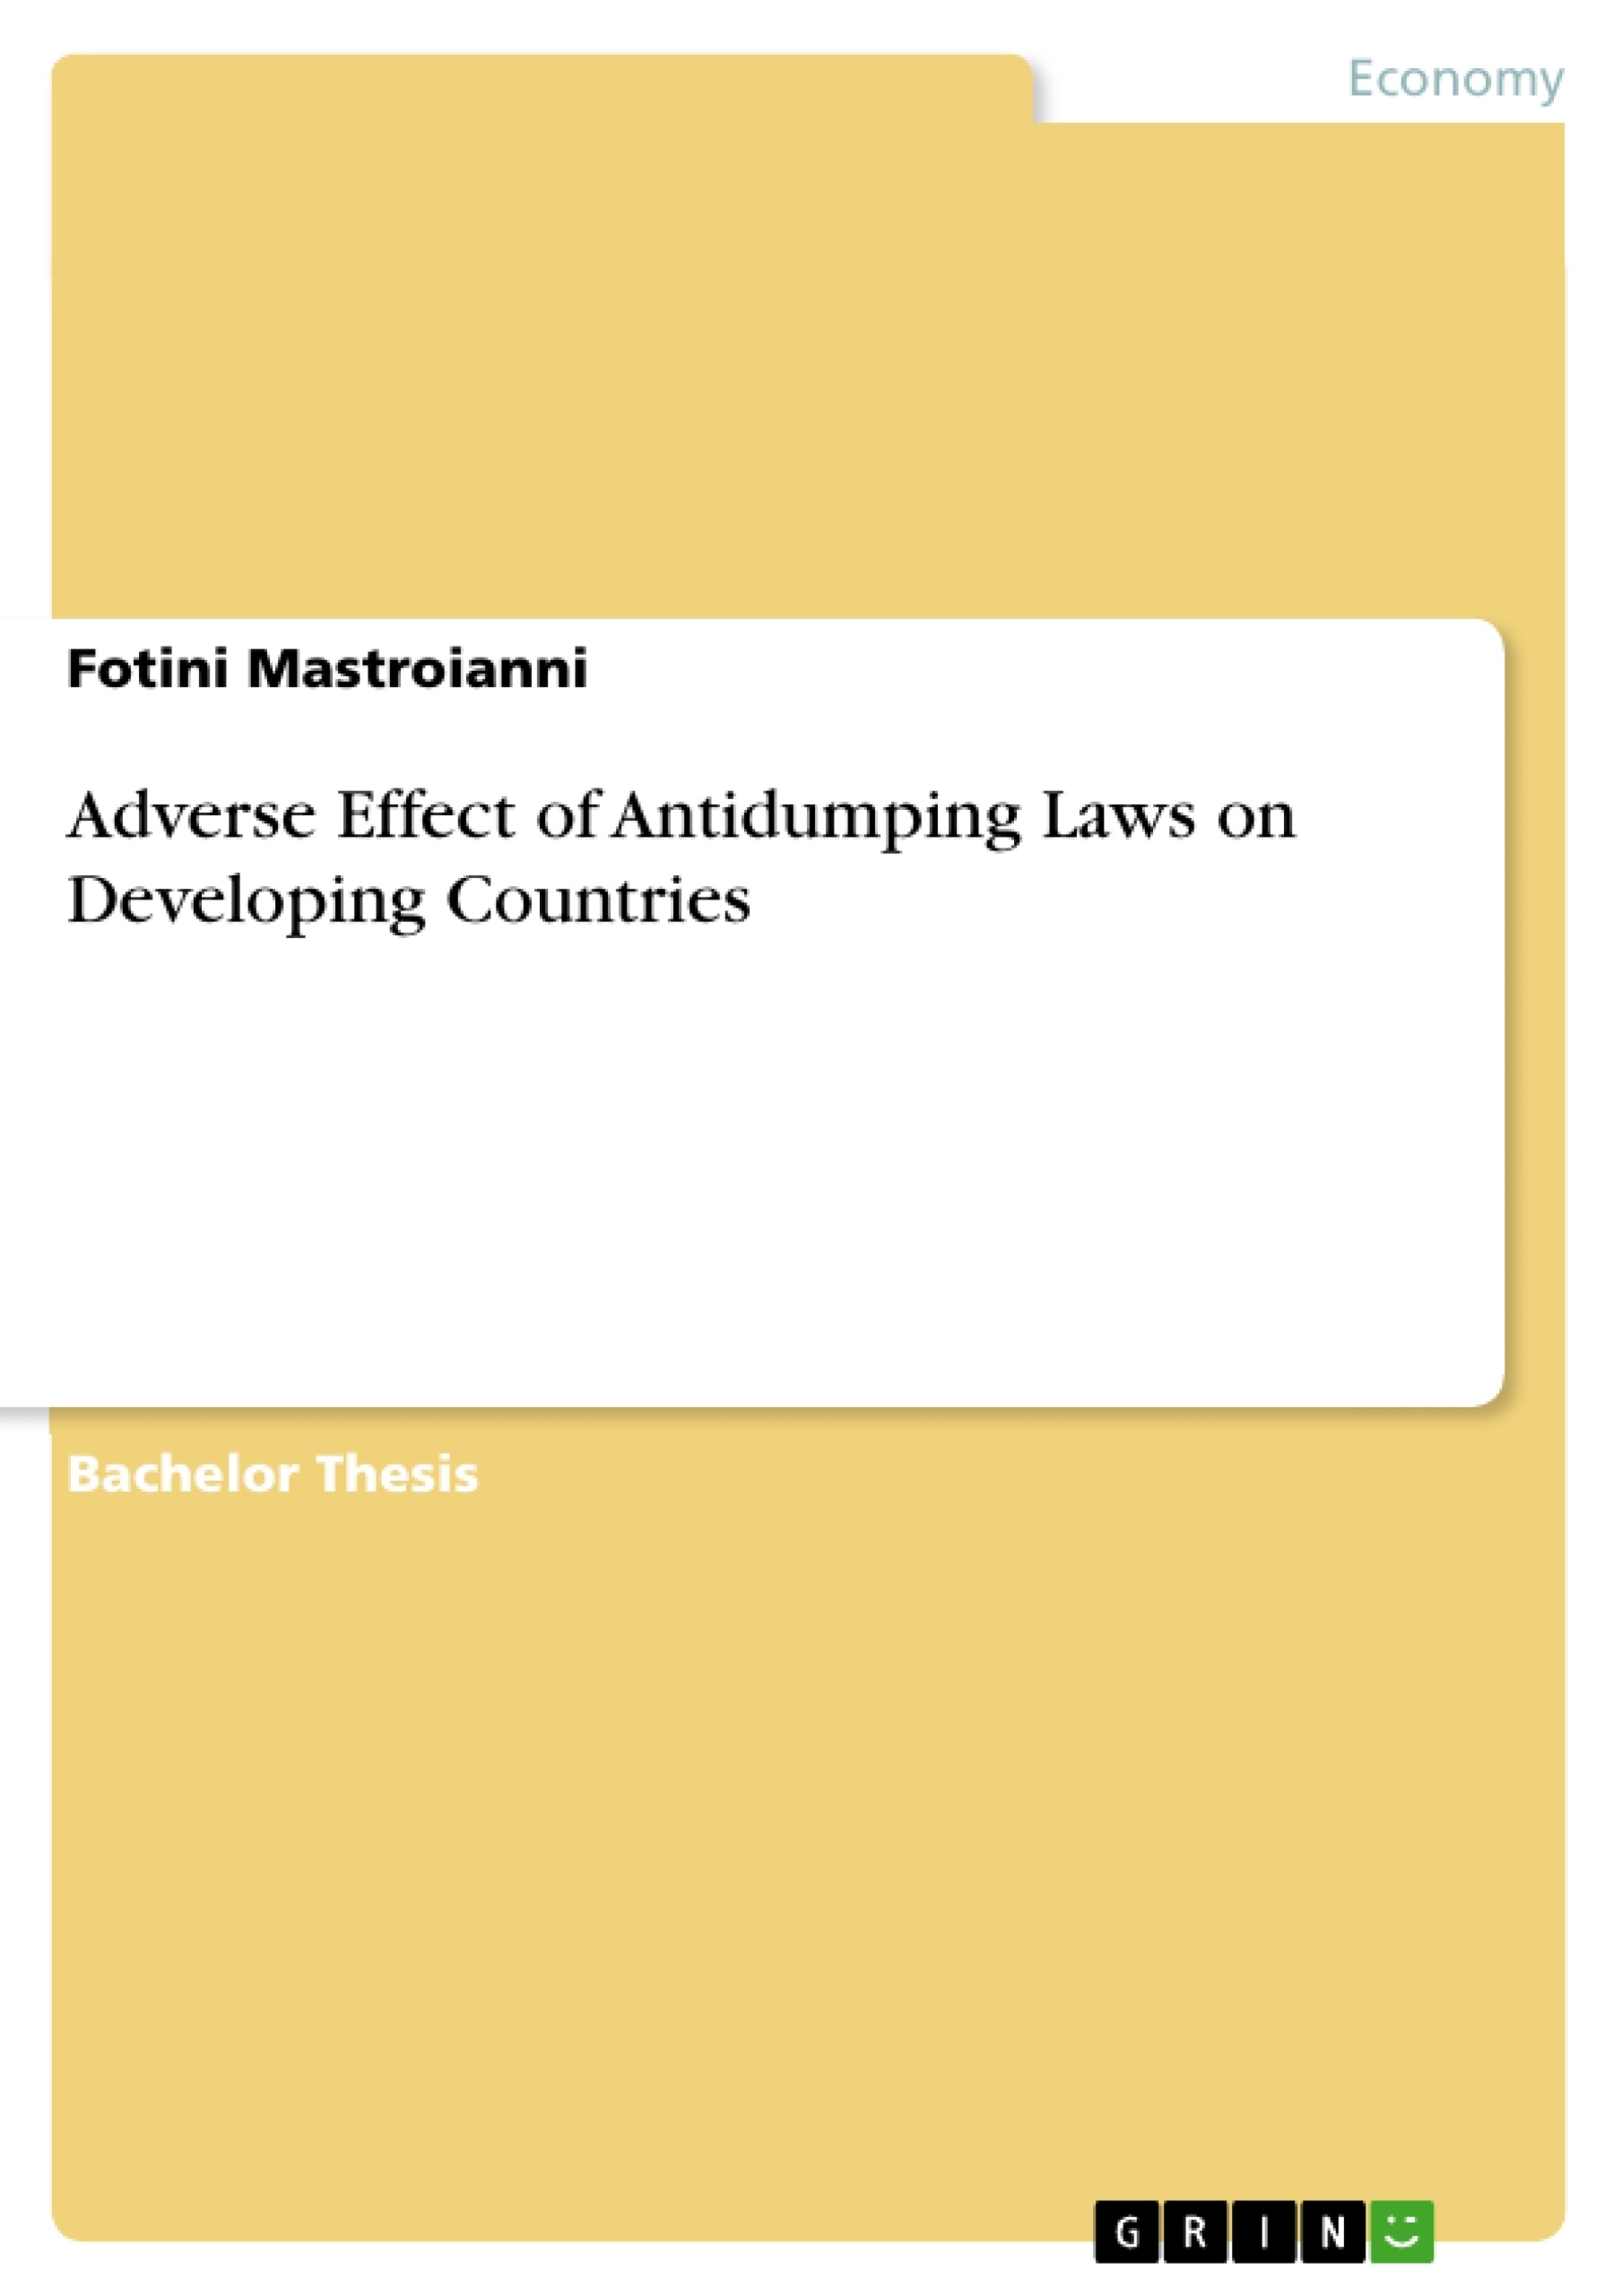 Título: Adverse Effect of Antidumping Laws on Developing Countries